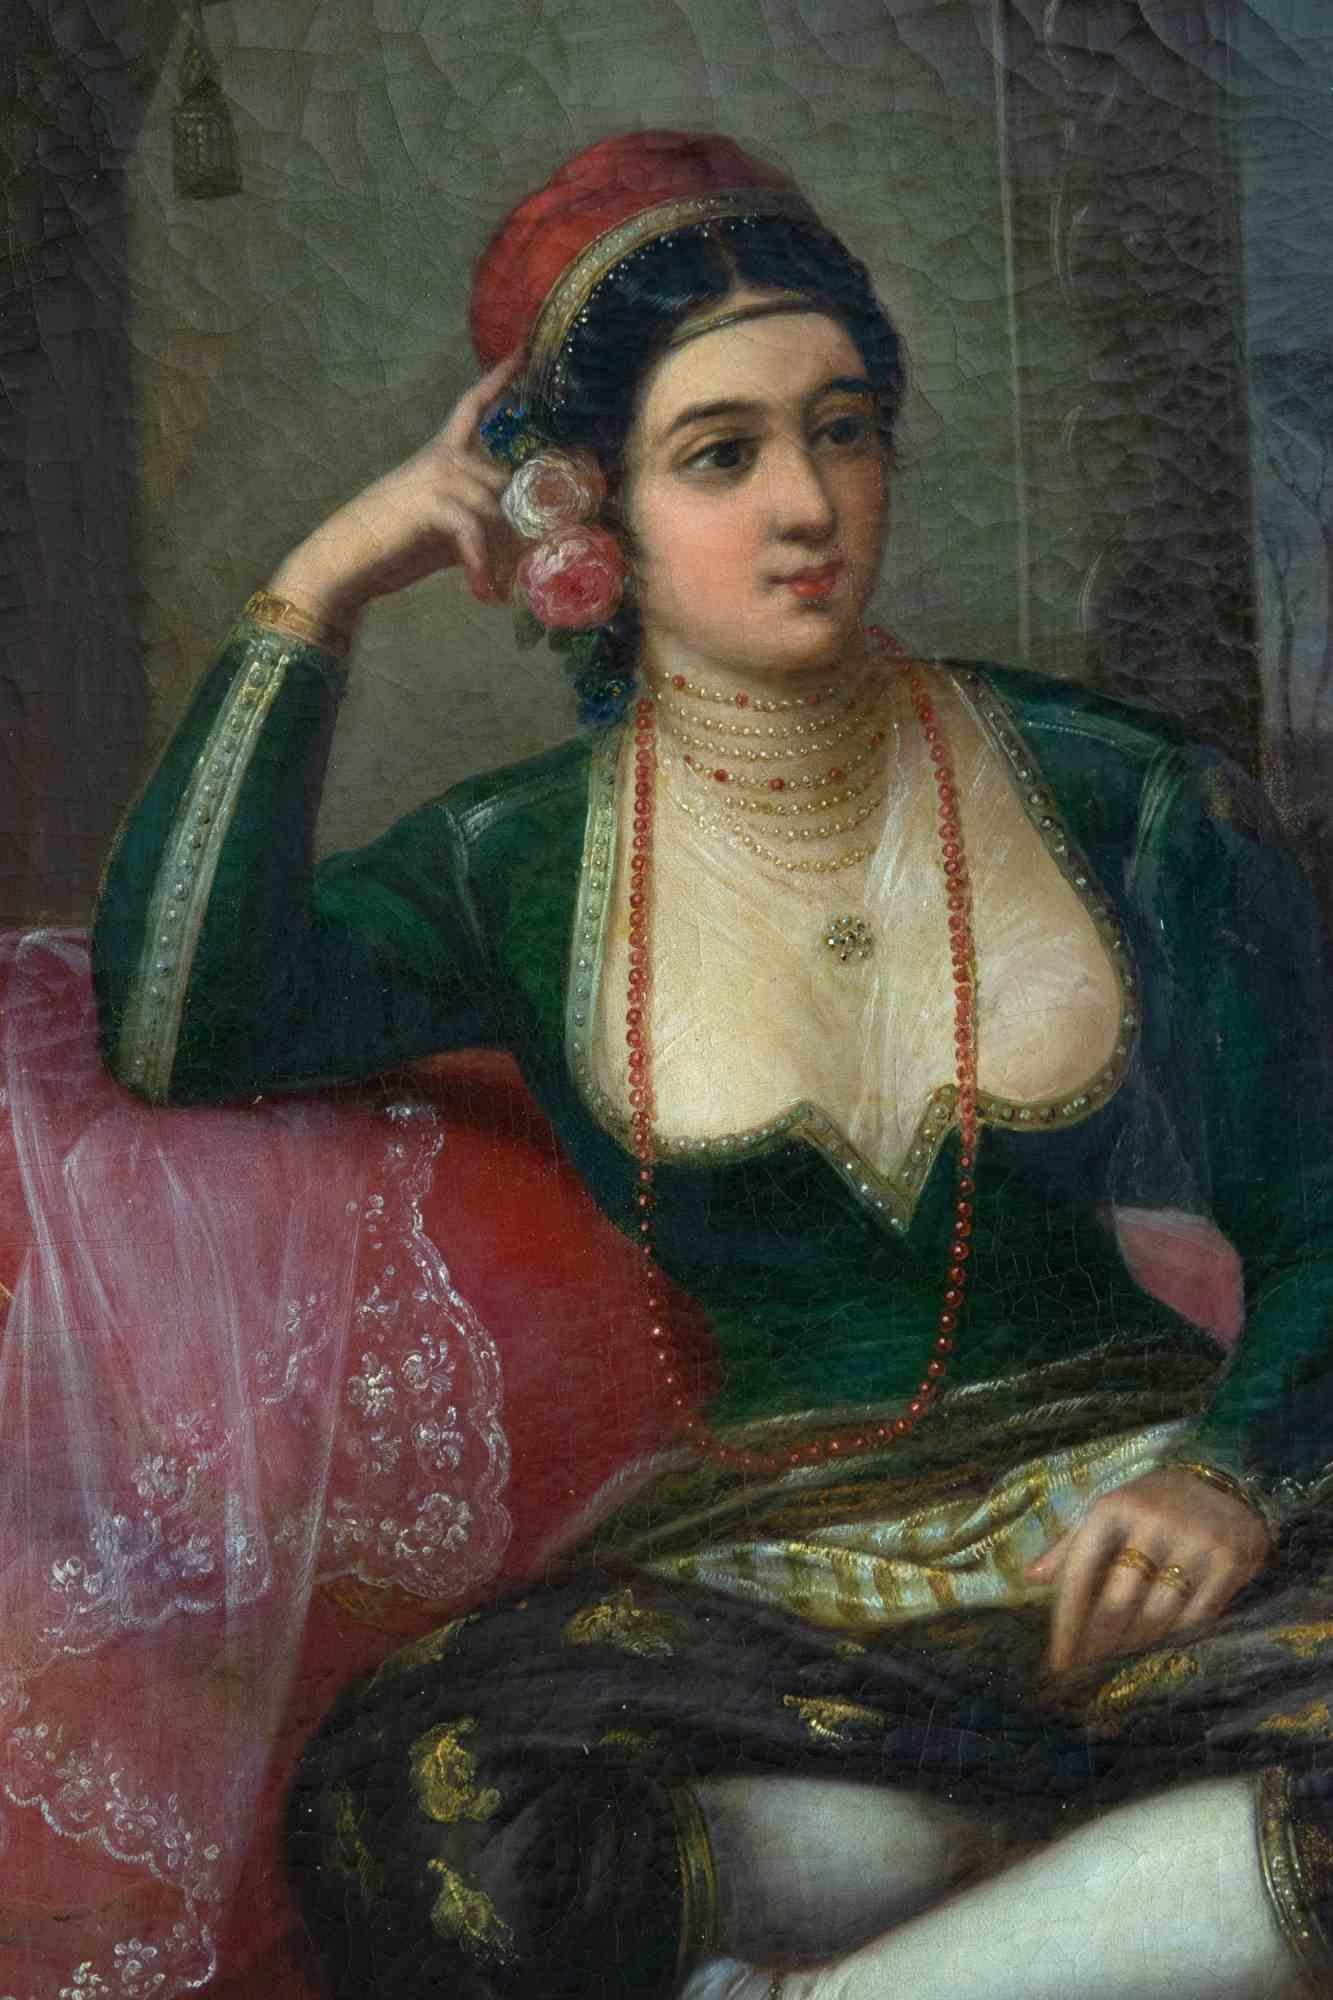 Lady in the Harem - Oil on Canvas - 19th Century - Contemporary Painting by Unknown